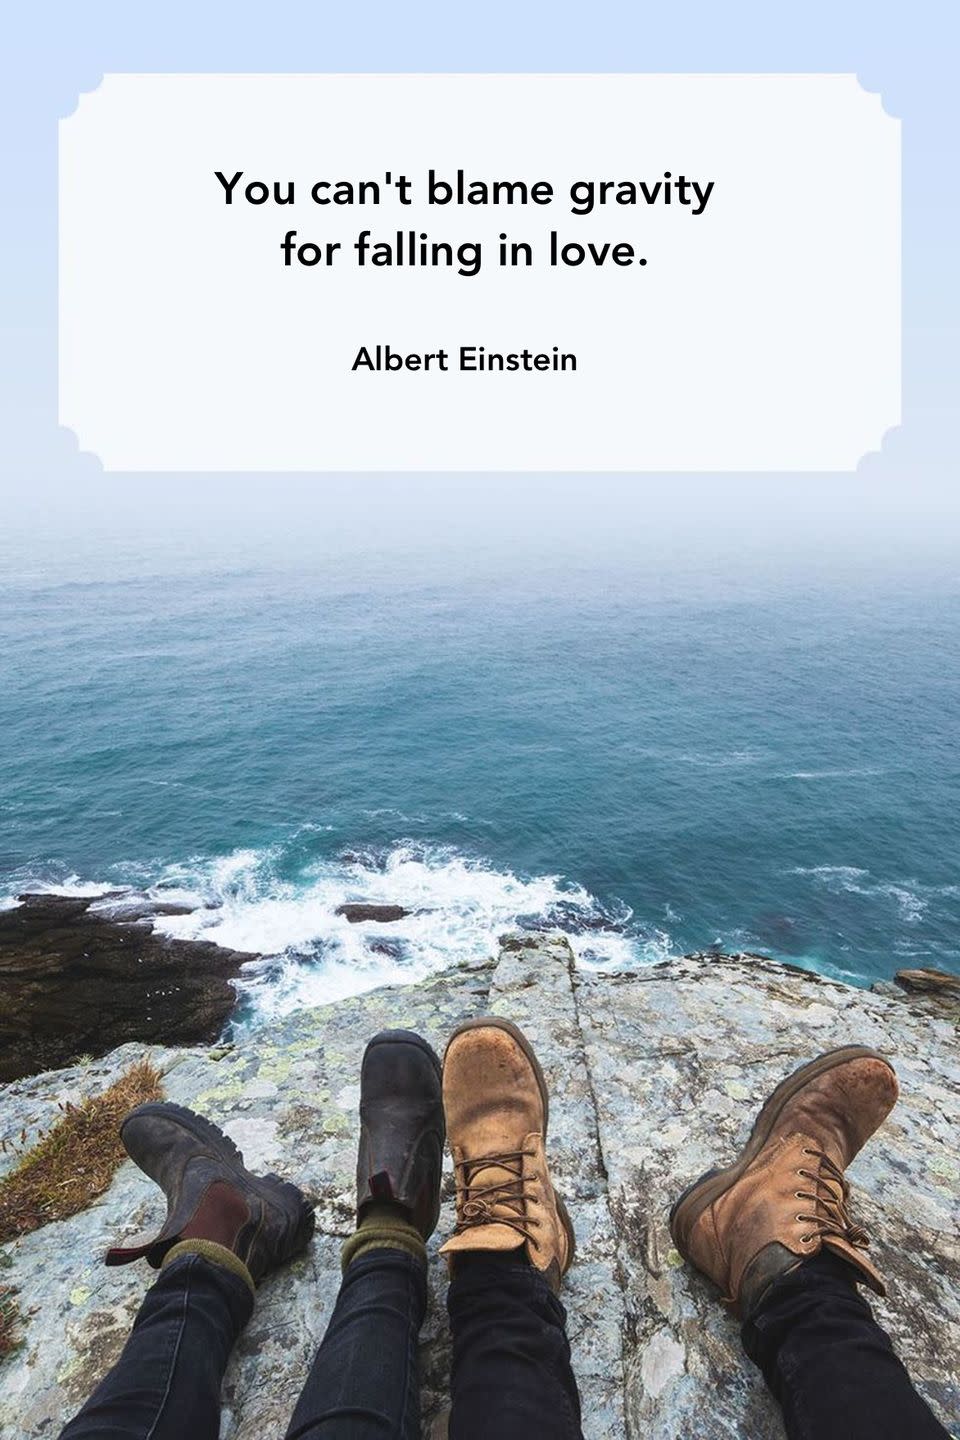 <p>"You can't blame gravity for falling in love."</p>